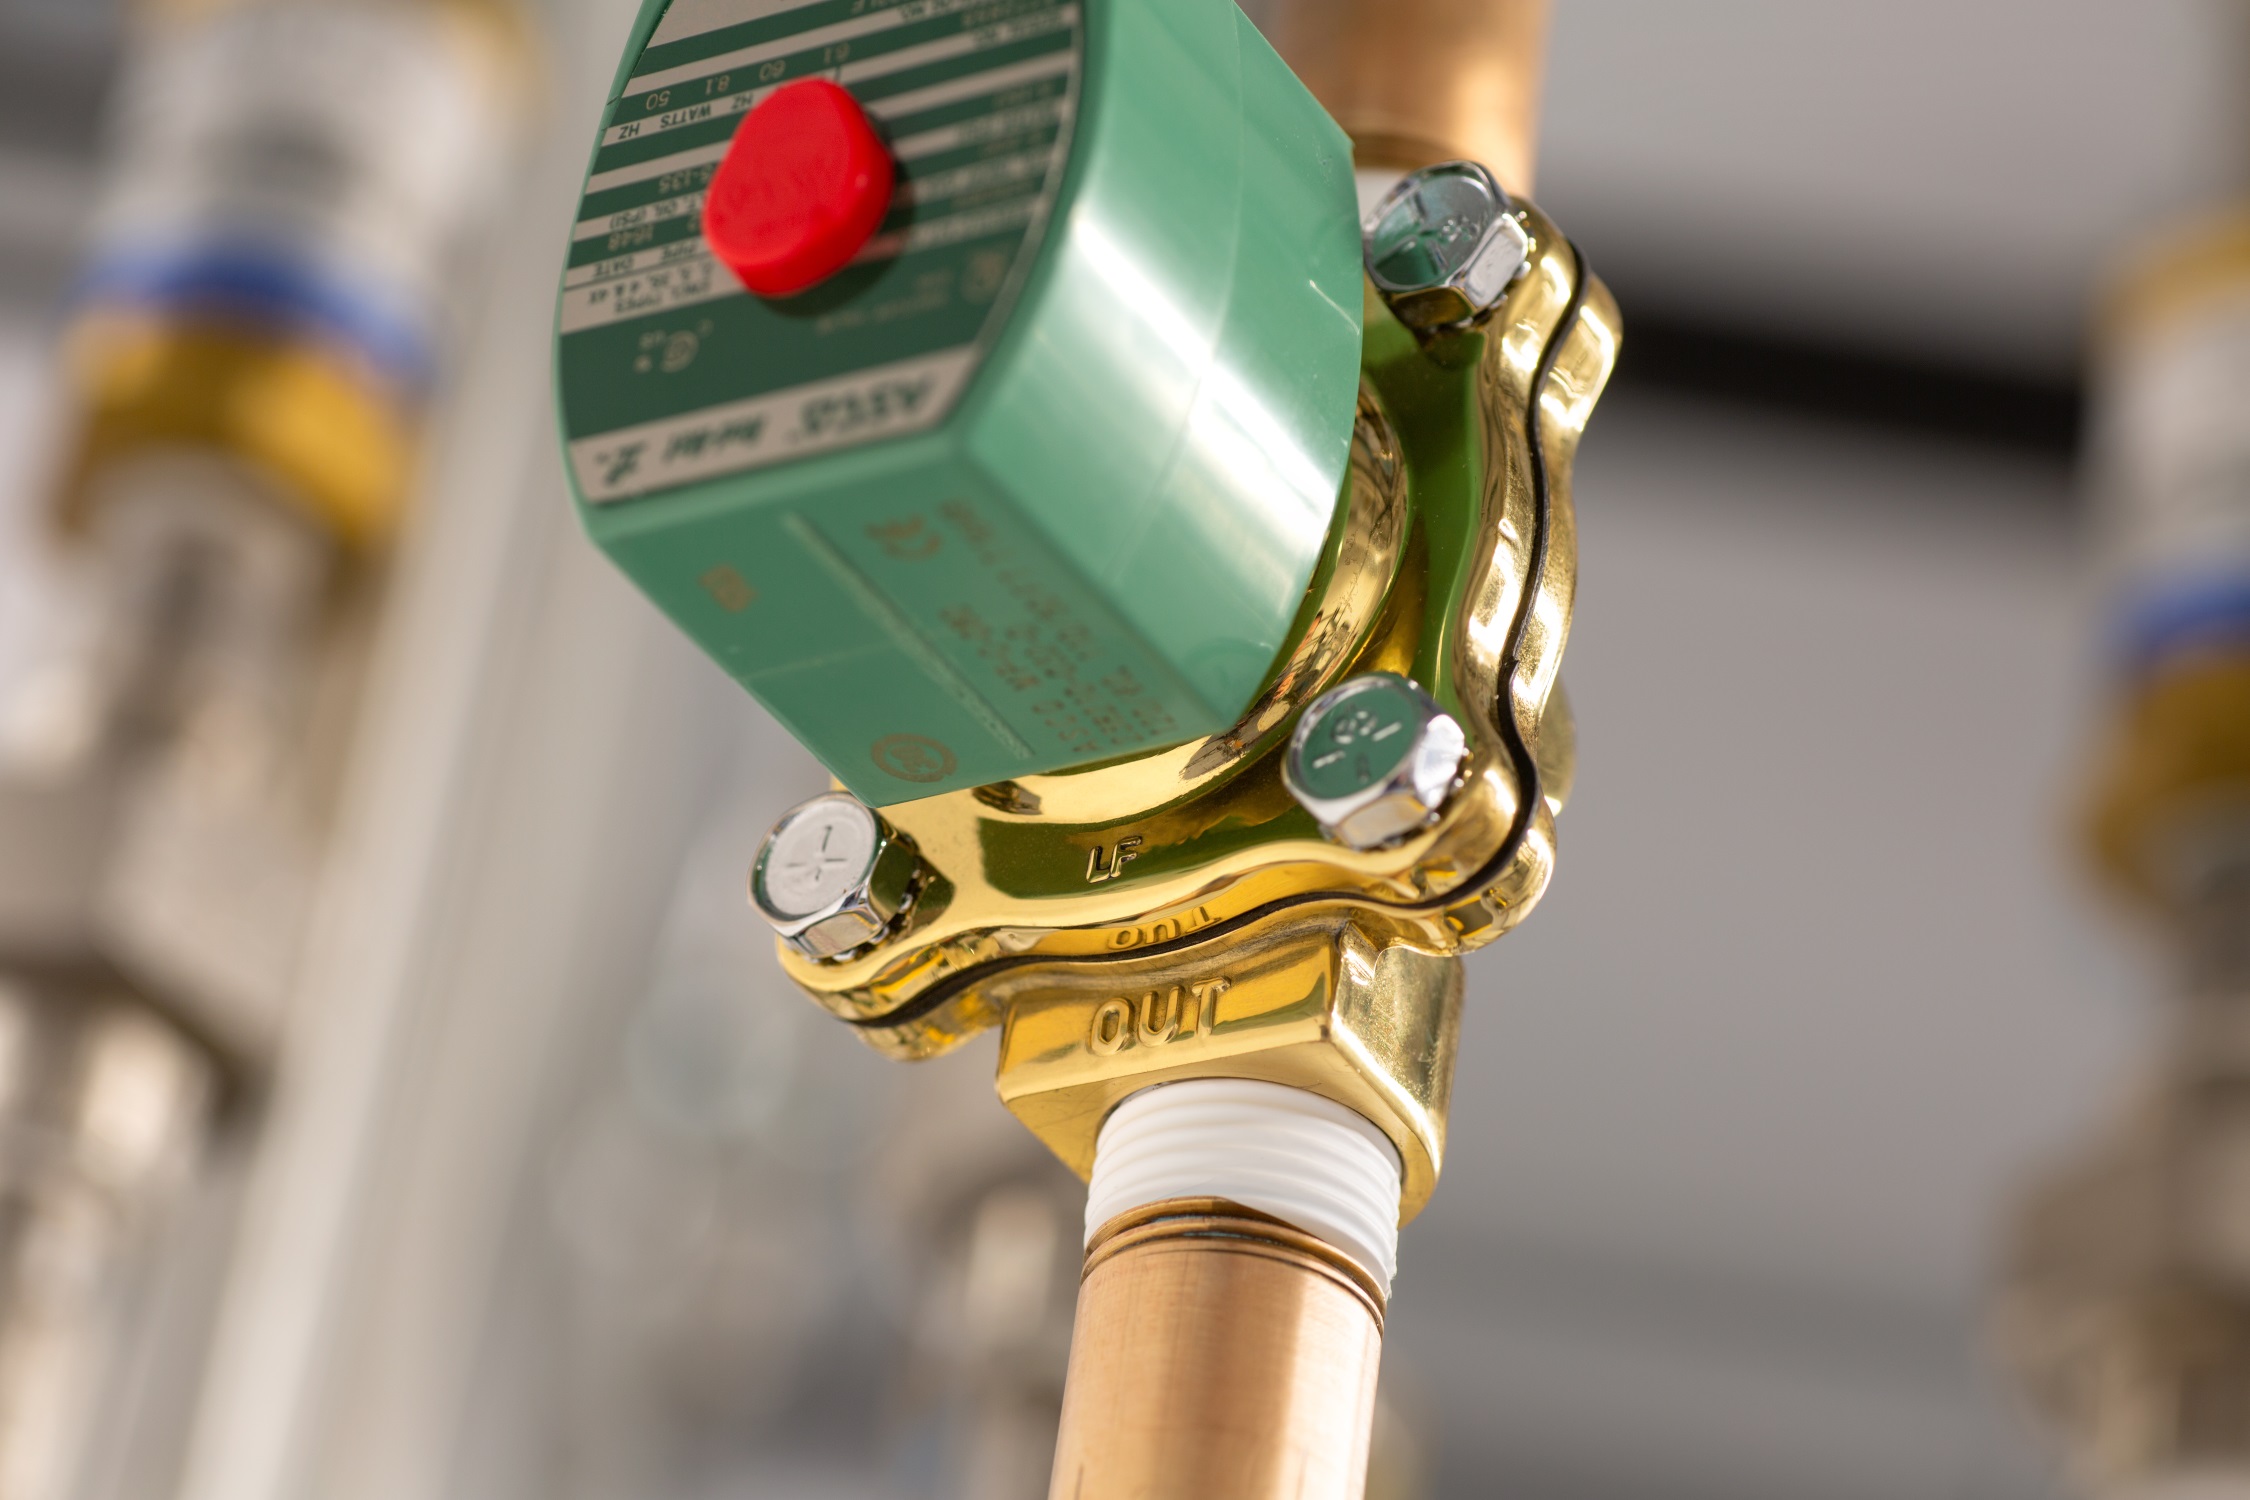 Emerson Expands Lead-Free Valve Line for Compliance with Safe Drinking Water Act Regulations